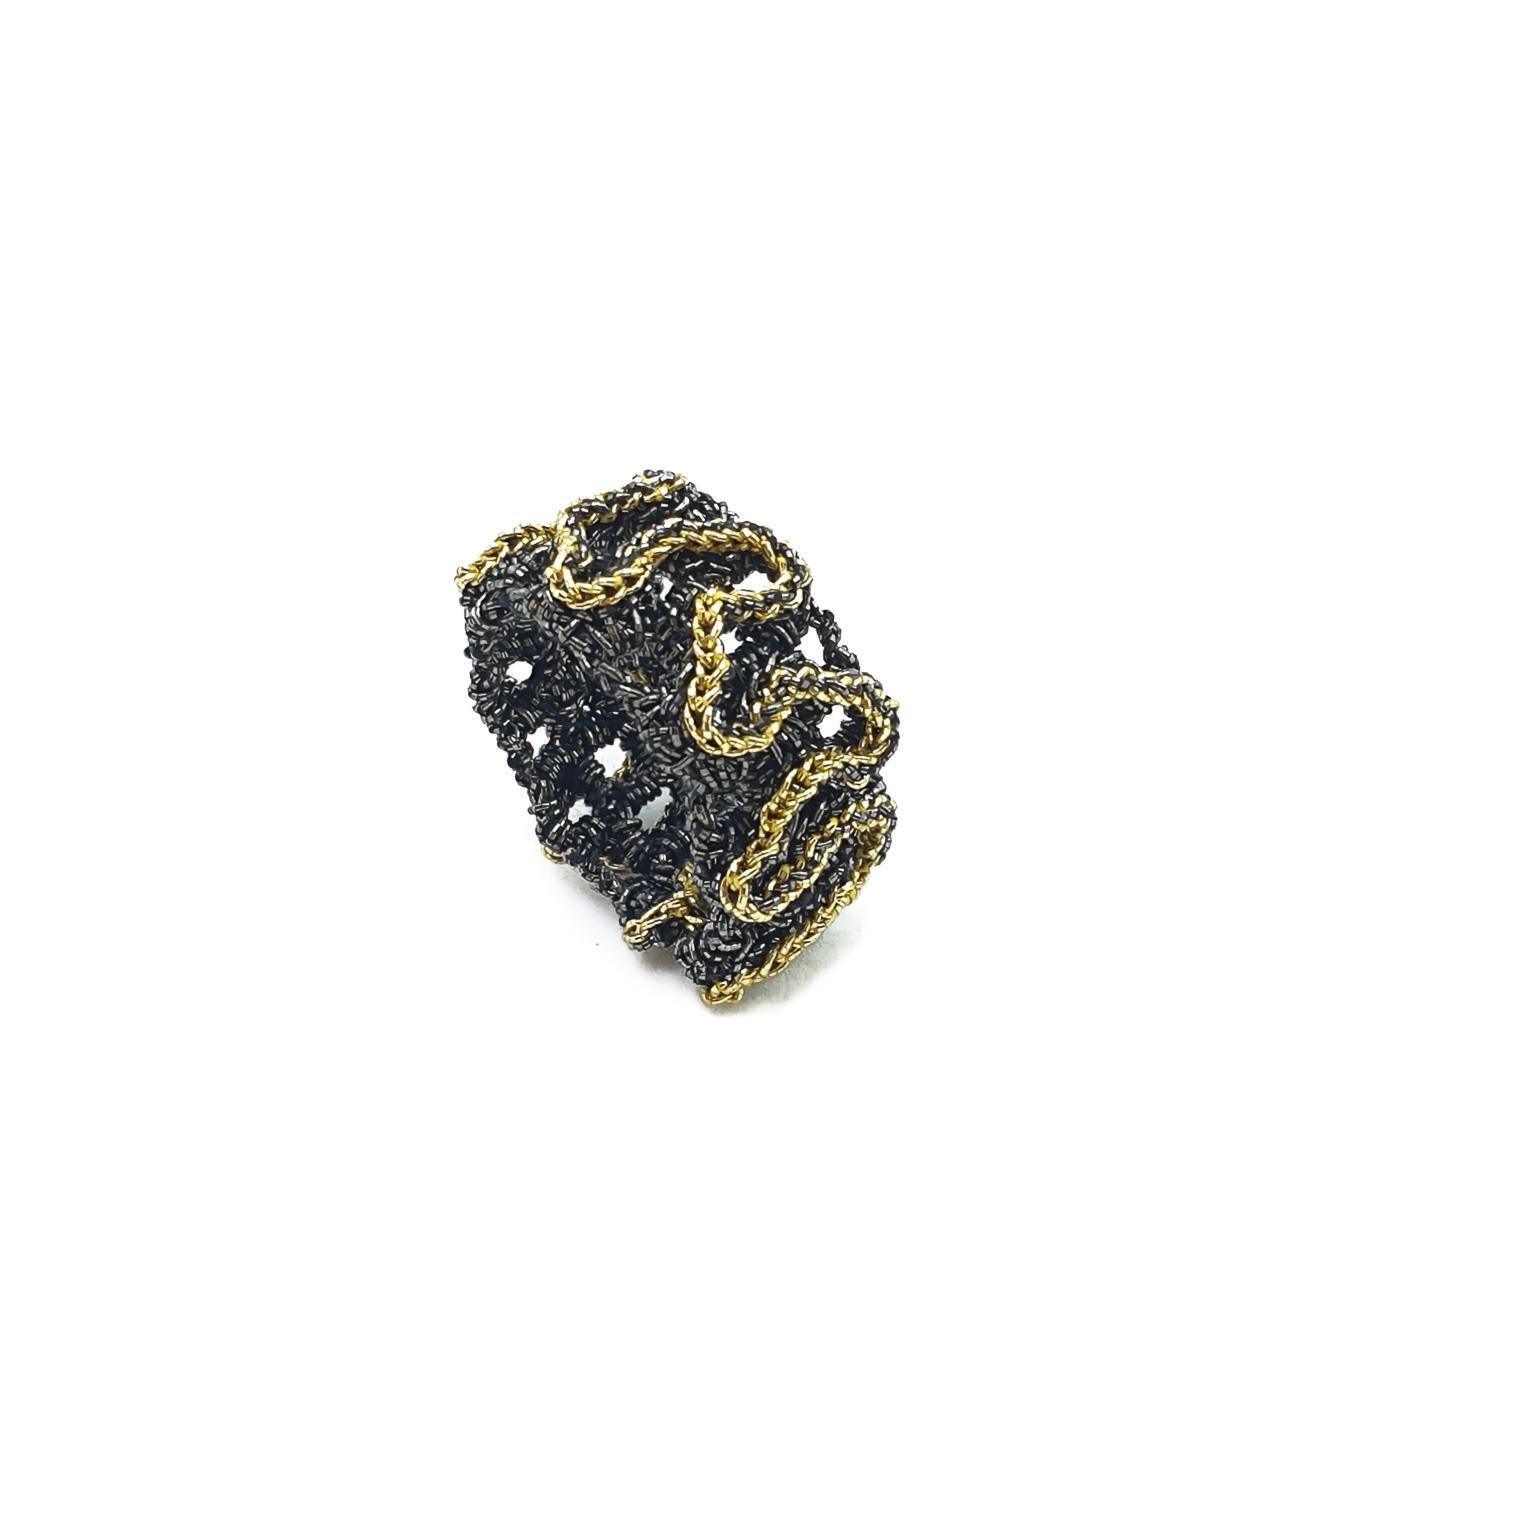 These are maze inspired fashion rings  They can be custom made. They can come in different combinations. Gold color, black, black and gold, gold and black. They can be crochet with a stone to add more color.

The rings are crochet with a smooth